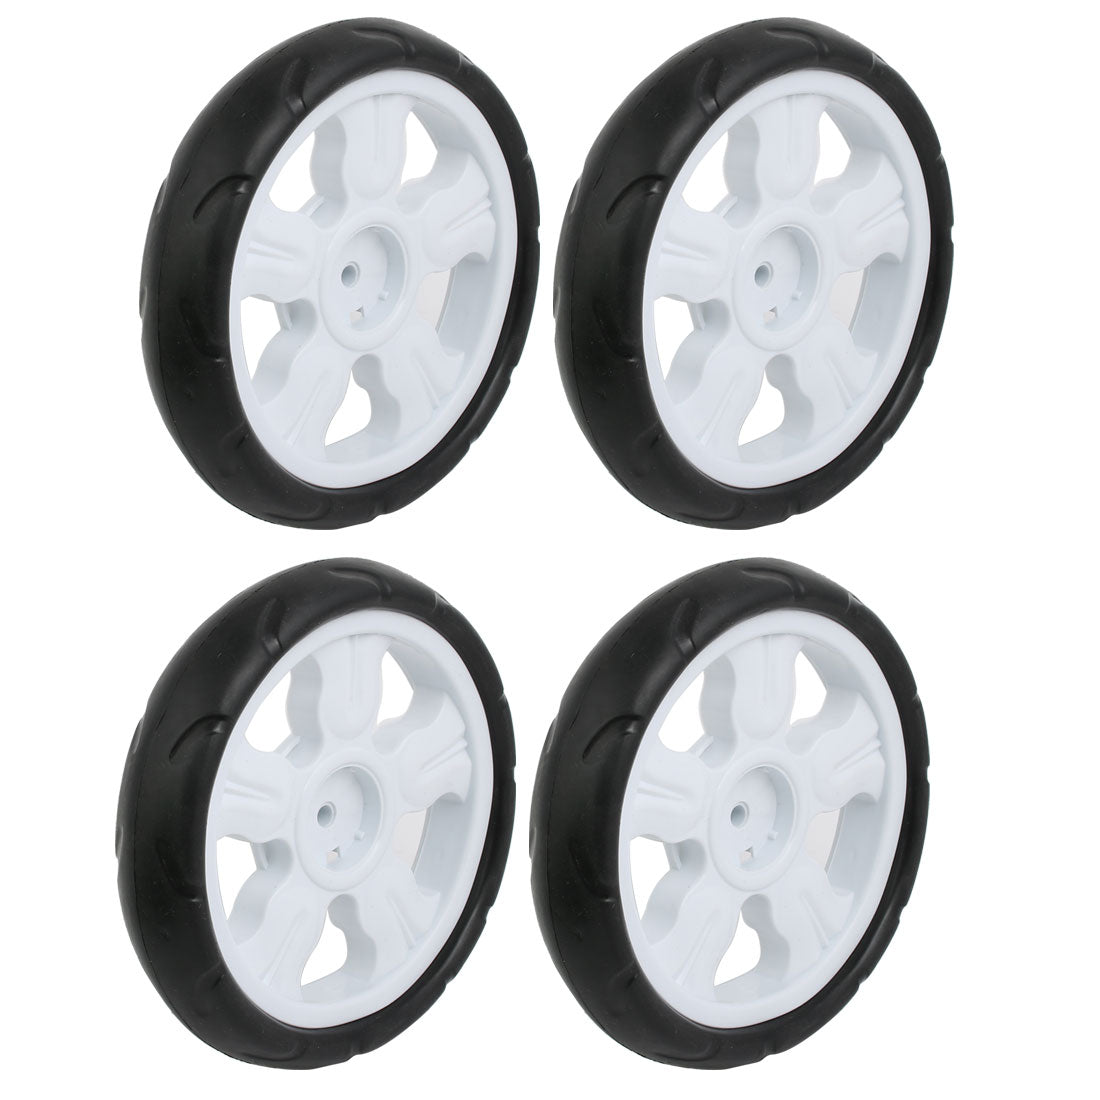 Uxcell Uxcell 4pcs 190mm Dia Plastic Single Wheel Pulley Rolling Roller White 8x25mm